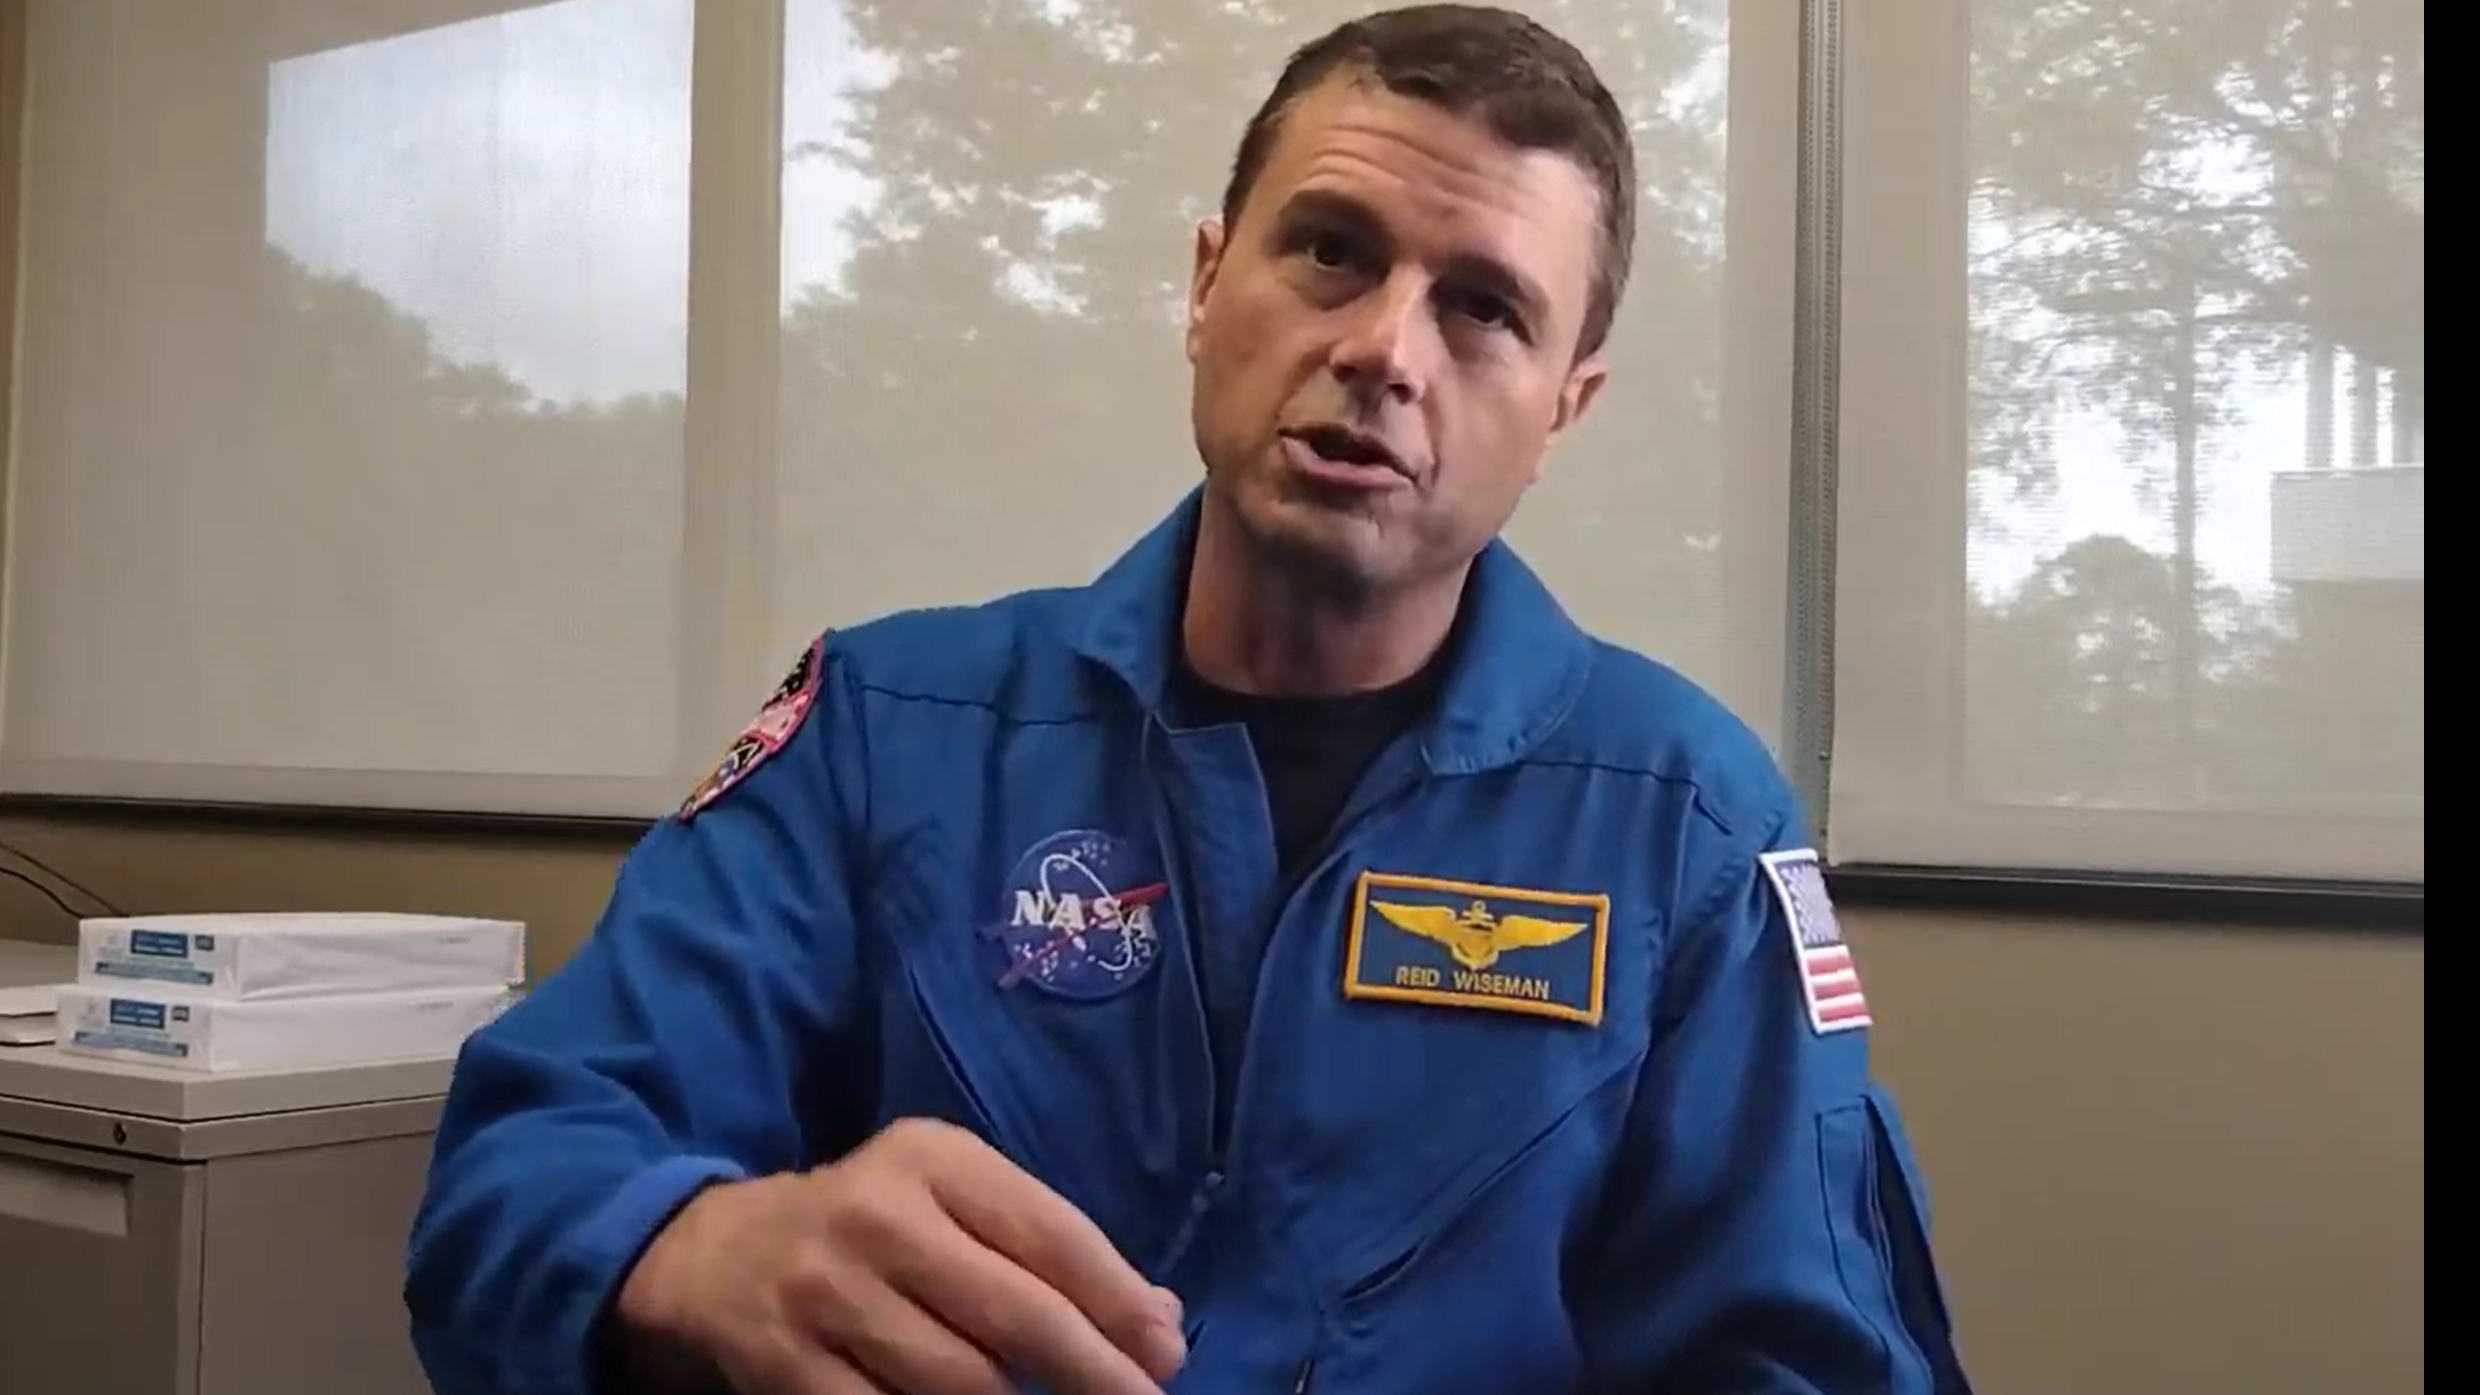 nasa astronaut reid wiseman in his flight suit talking to the camera. nasa's path is on his chest along with his name tag